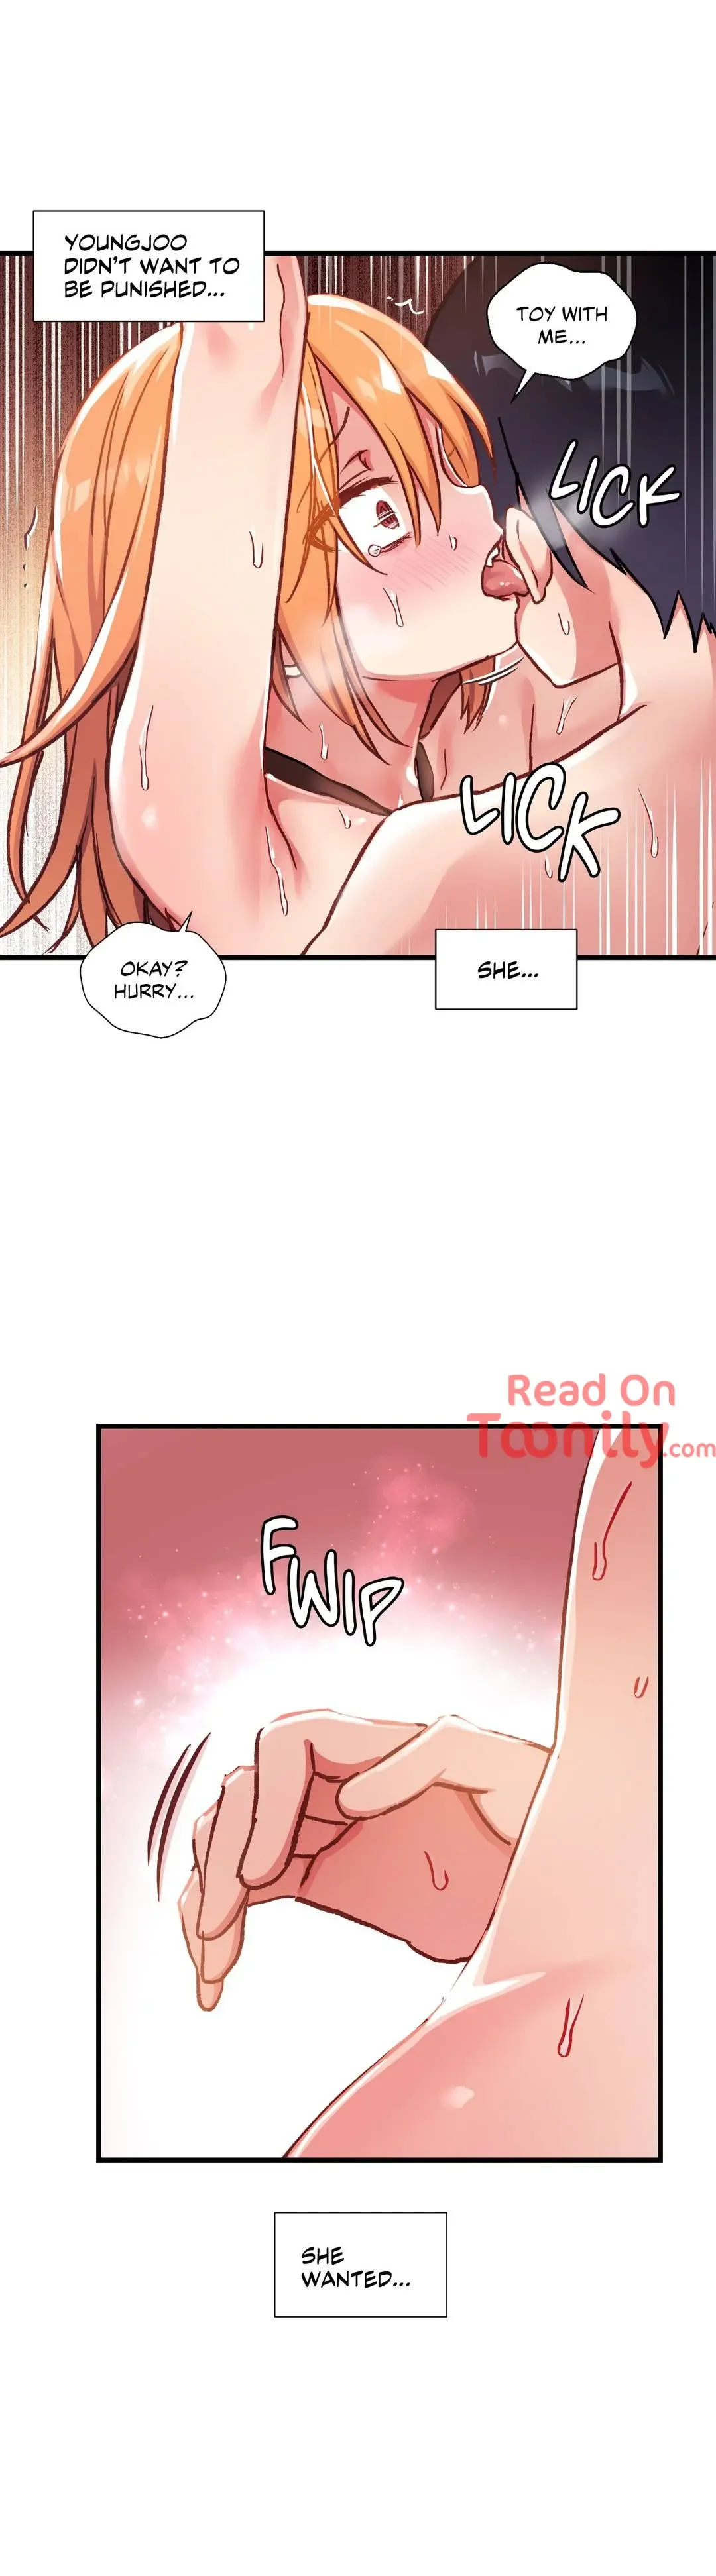 under-observation-my-first-loves-and-i-chap-49-8